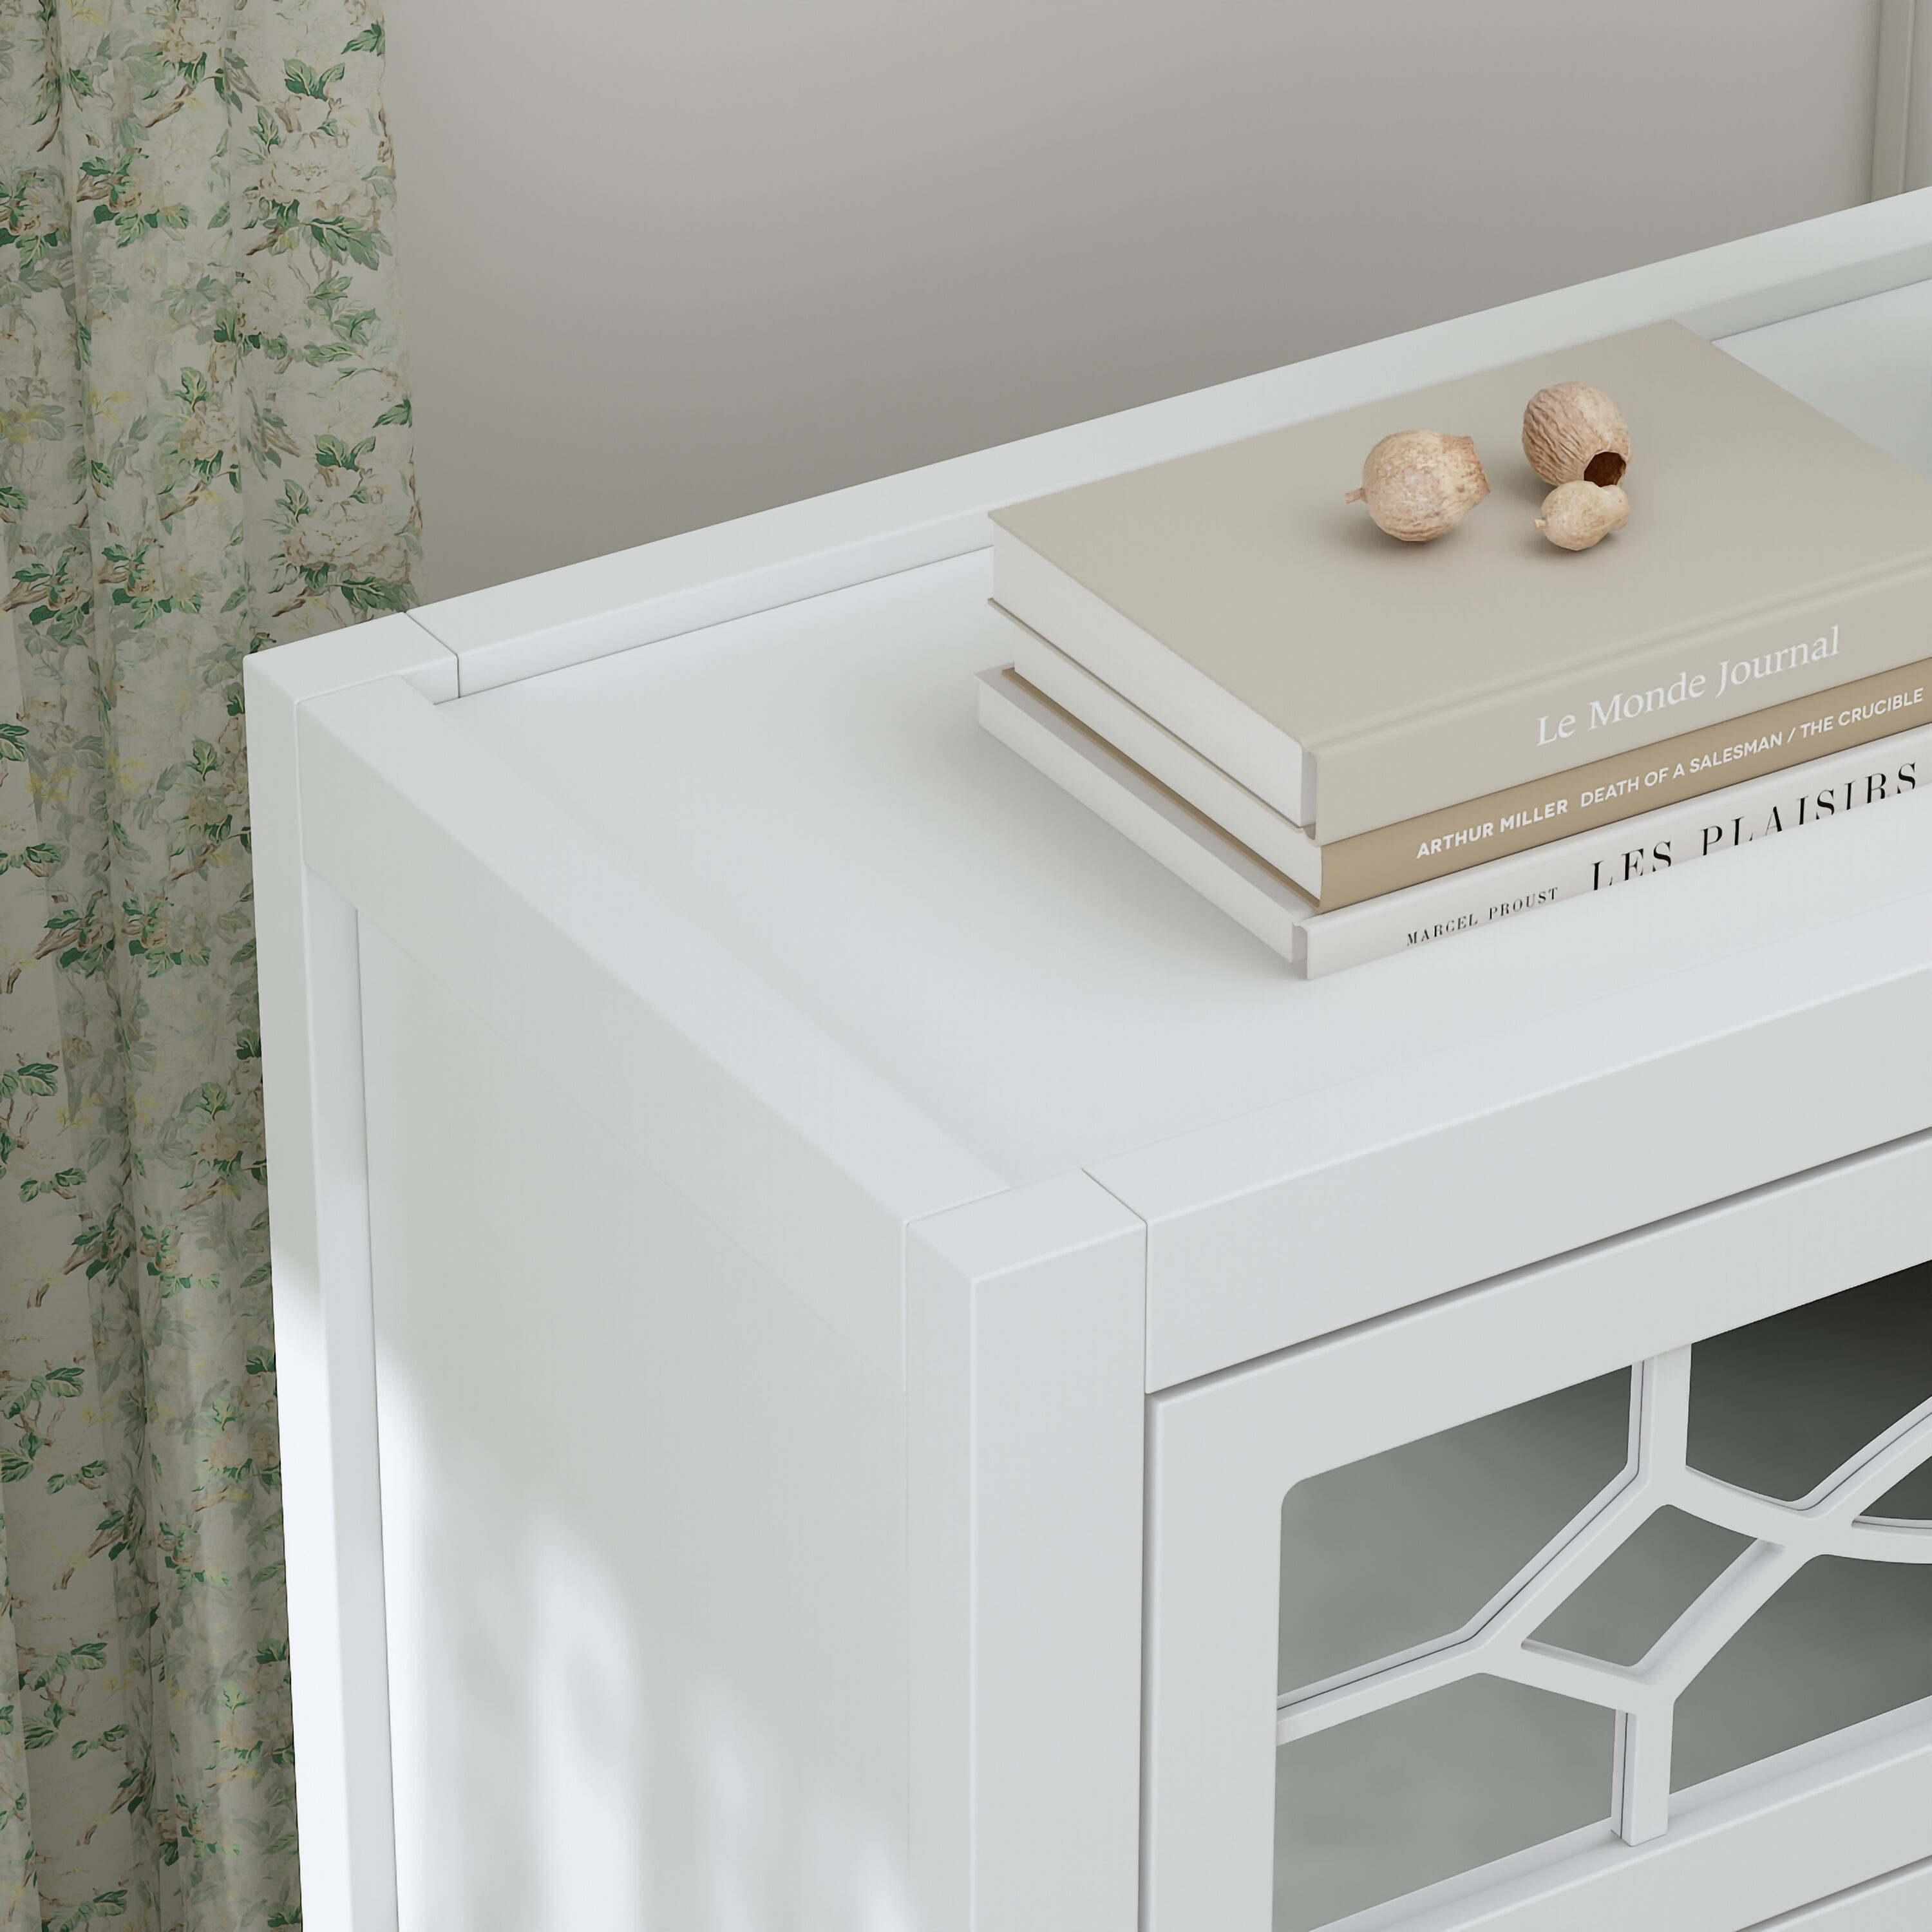 Night Stand with Built In Fridge – Luxury Gadgets Galore